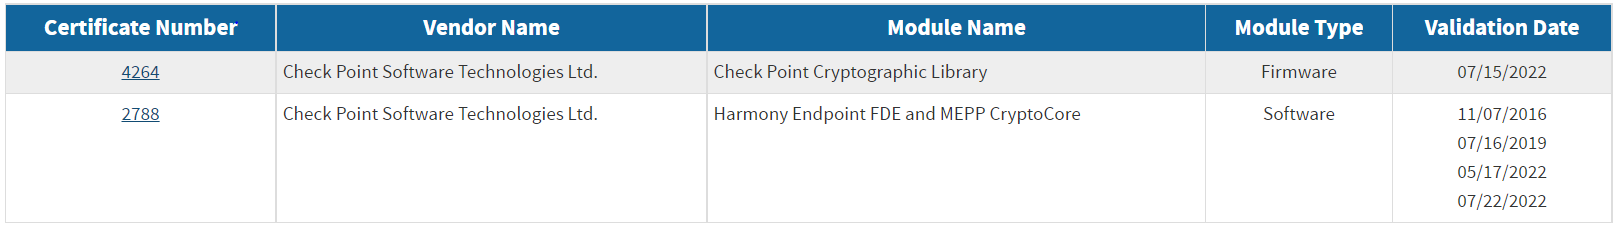 FIPS 140 2 certificate updates Quantum and Harmo Check Point